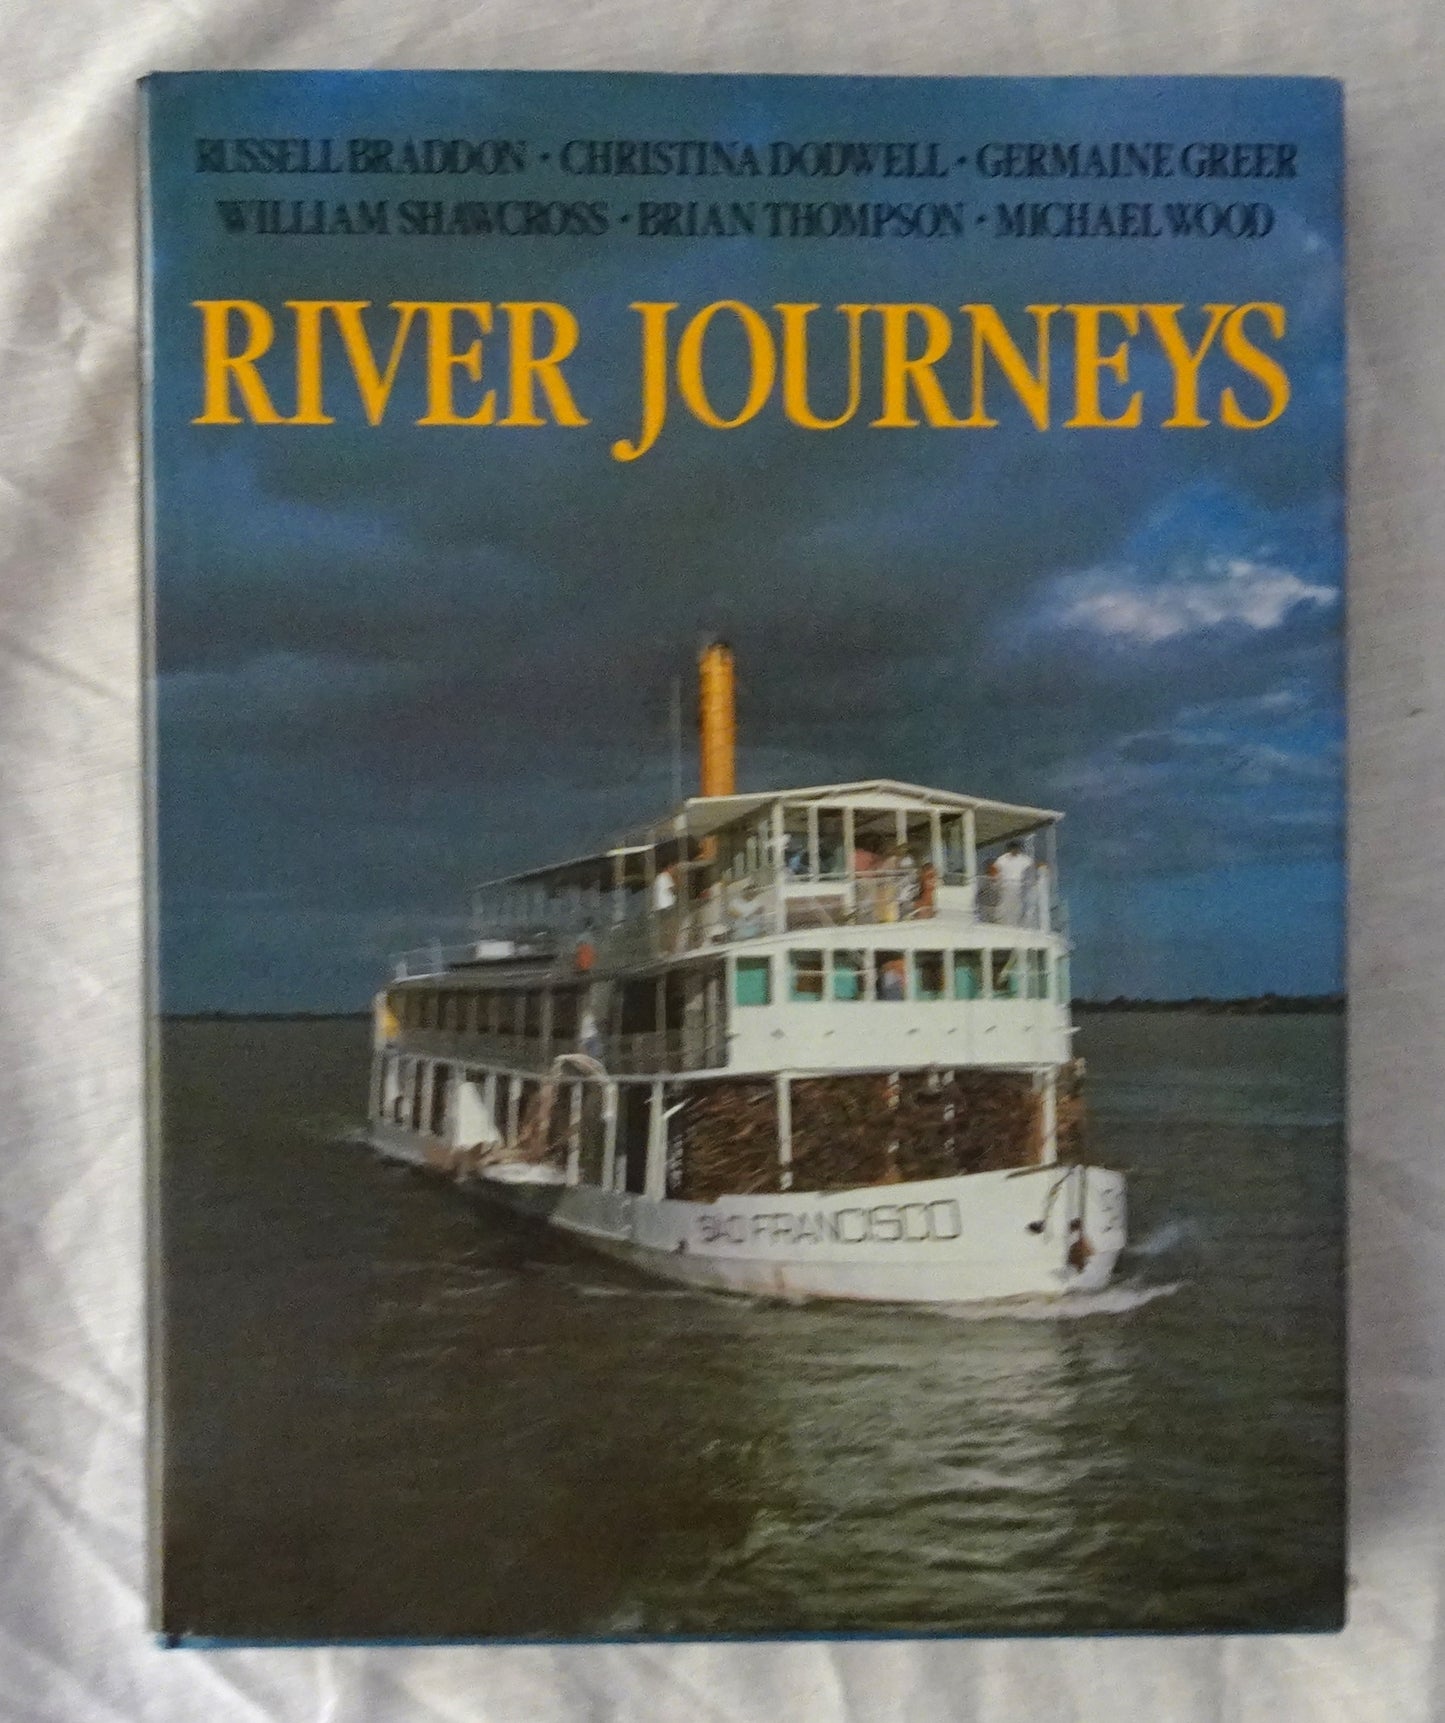 River Journeys  by Russsell Braddon, Christina Dodwell, Germaine Greer, William Shawcross, Brian Thompson and Michael Wood